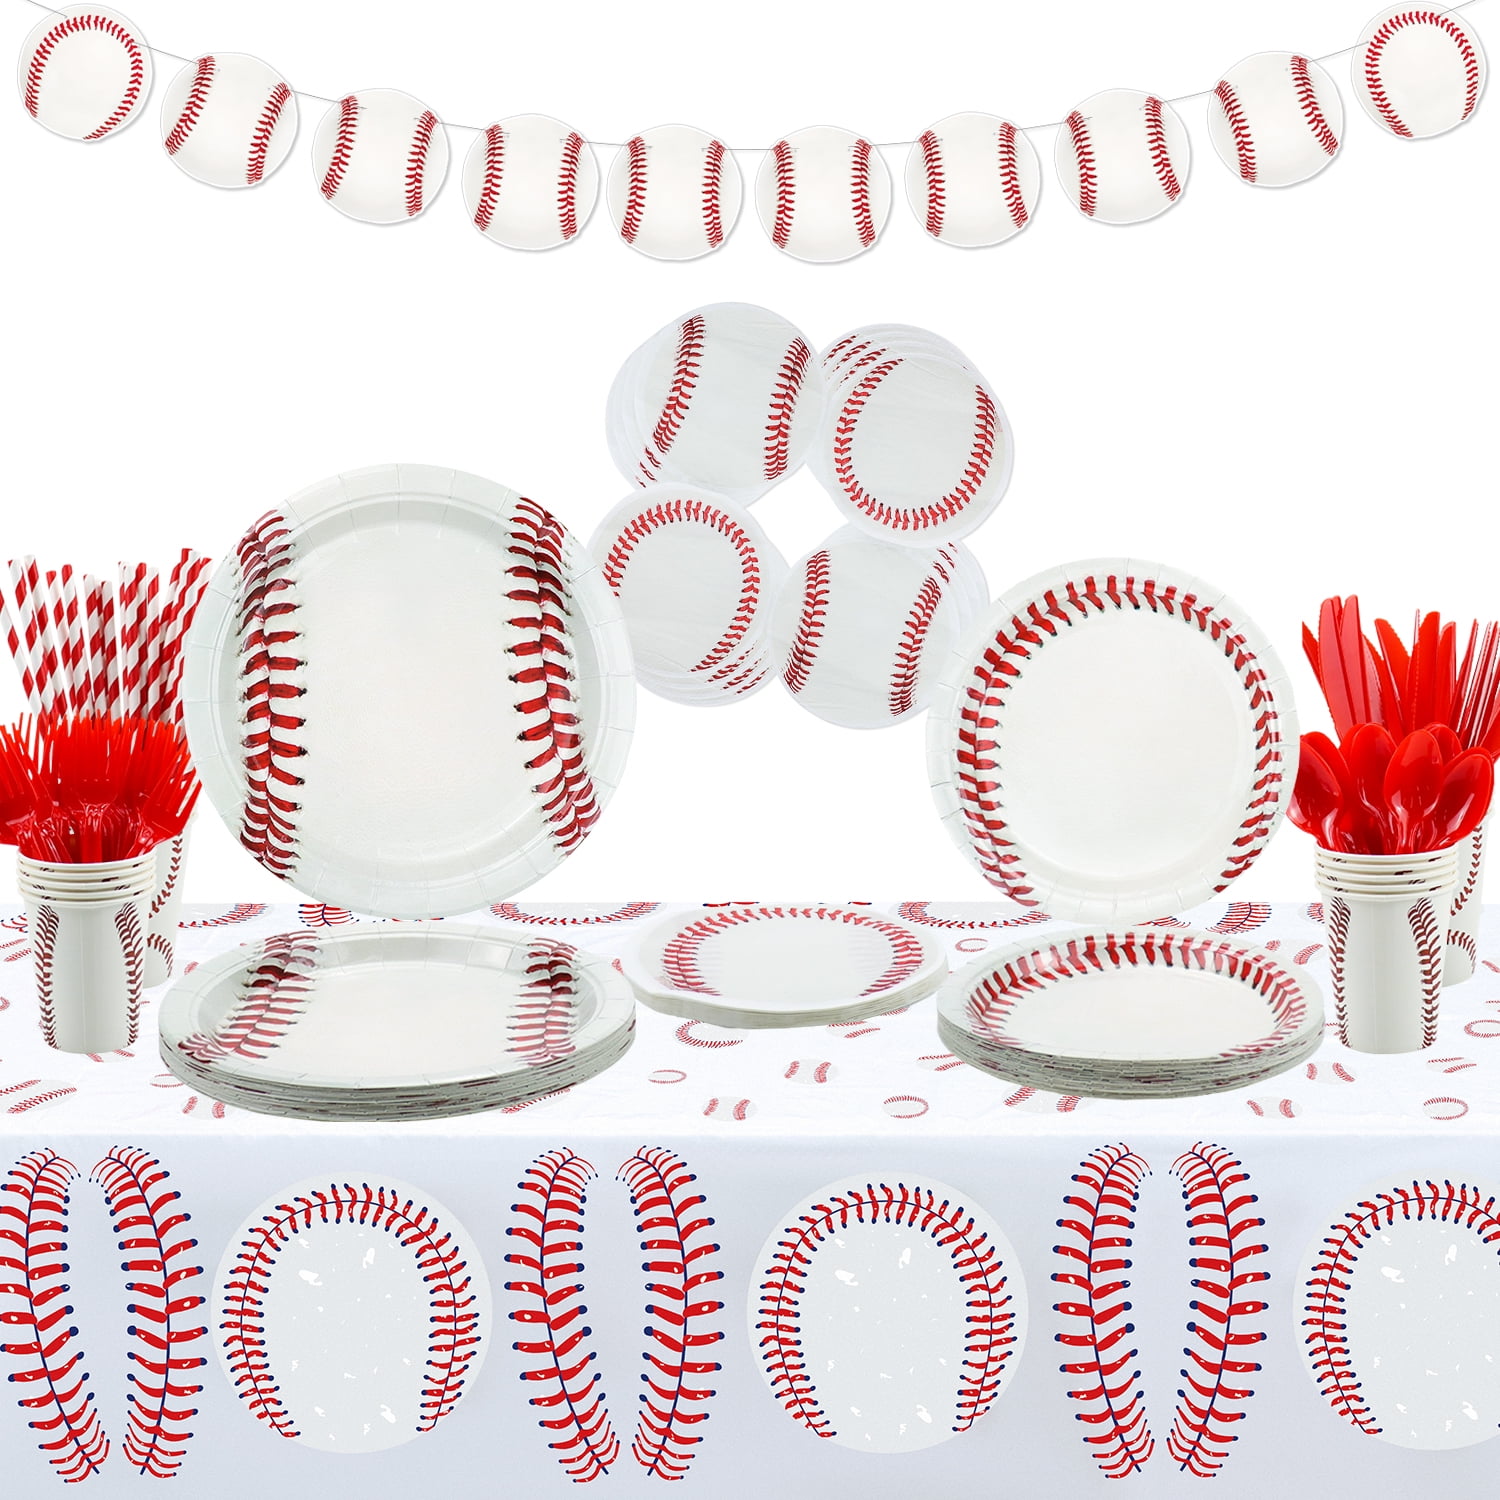  Sawysine 192 Pcs Baseball Party Supplies Bundle, Disposable  Paper Baseball Plates Cups Napkins Knife Fork Spoon Straw, Baseballs Party  Birthday Decorations Favors for Boys Girls Serves 24 : Home & Kitchen